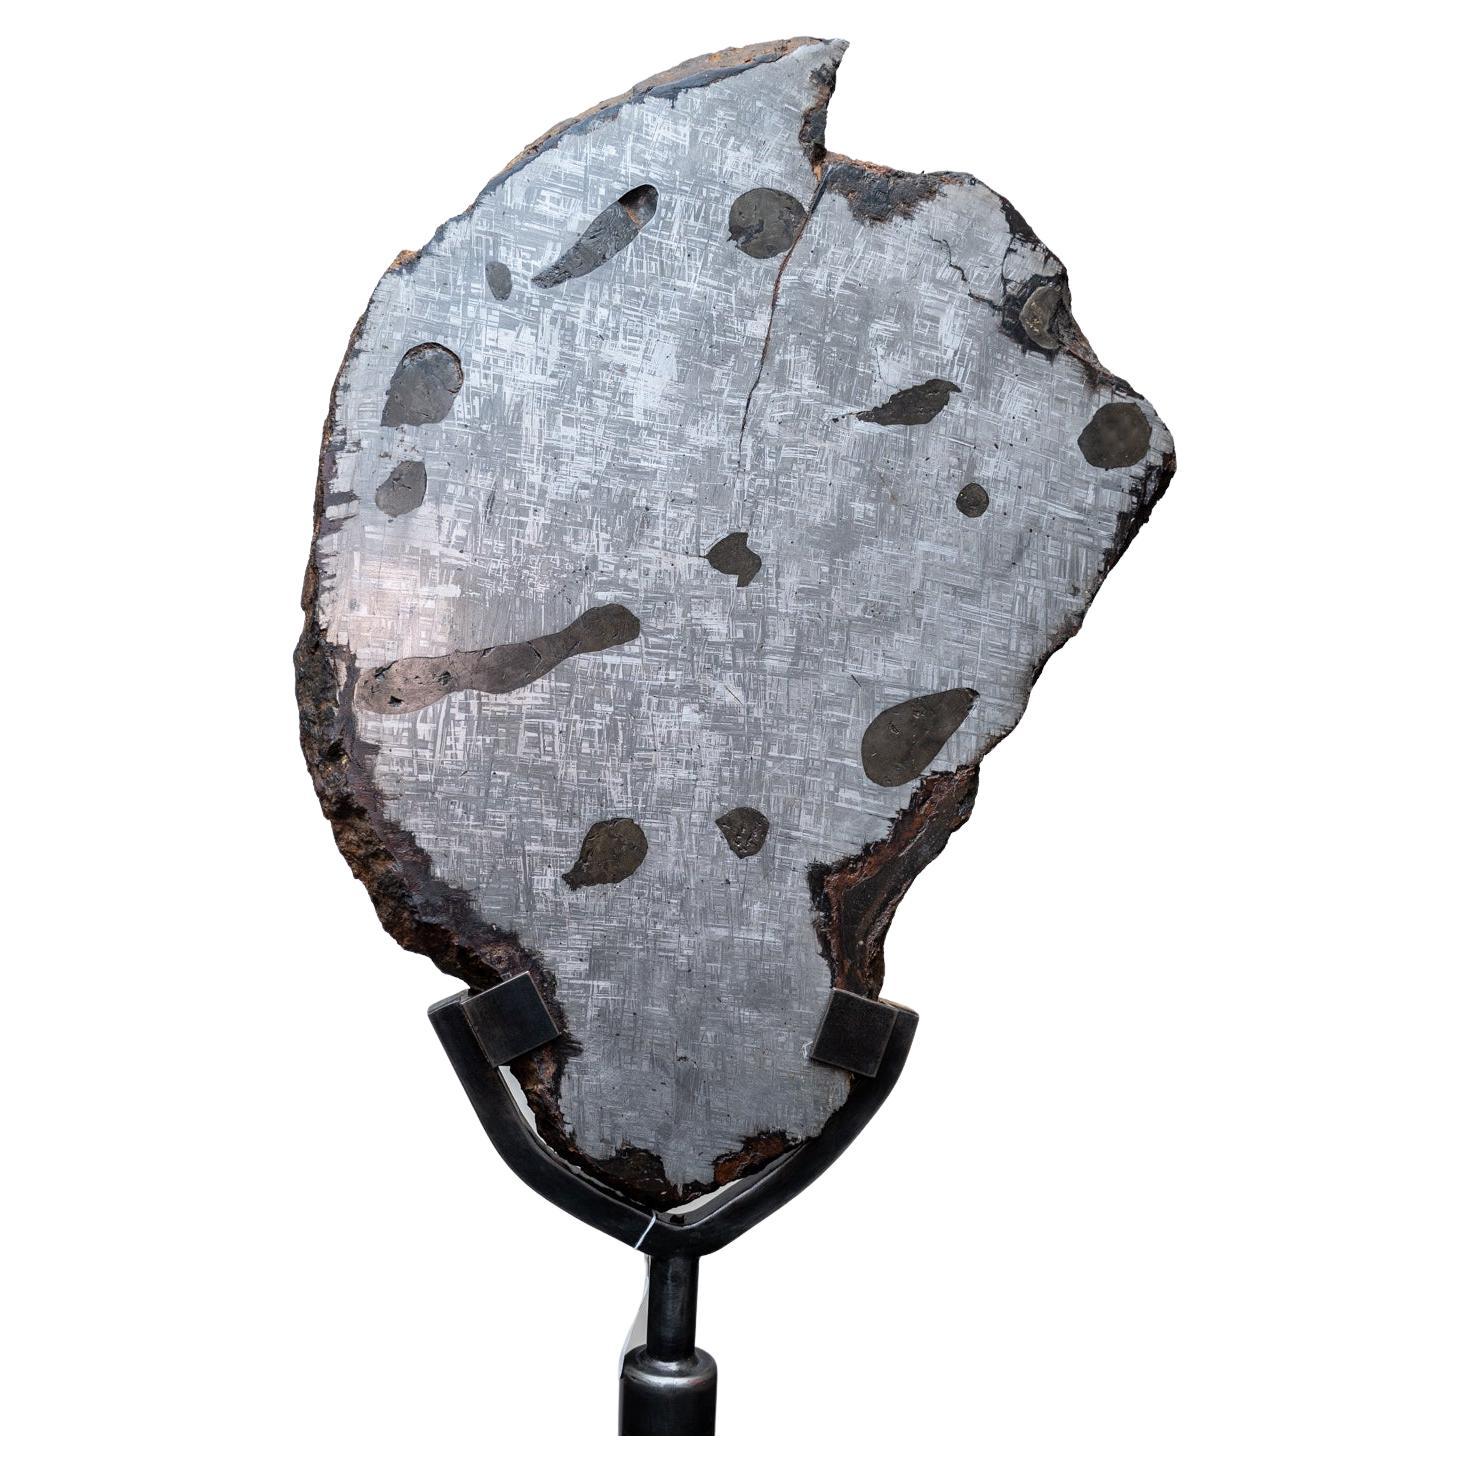 Truly a museum quality piece, this giant meteorite is a completely solid, natural Muonionalusta Meteorite sliced & polished which boasts its beautiful, metallic Widmanstätten pattern. The meteorite alone weighs 86.6 pounds and measures 17.25